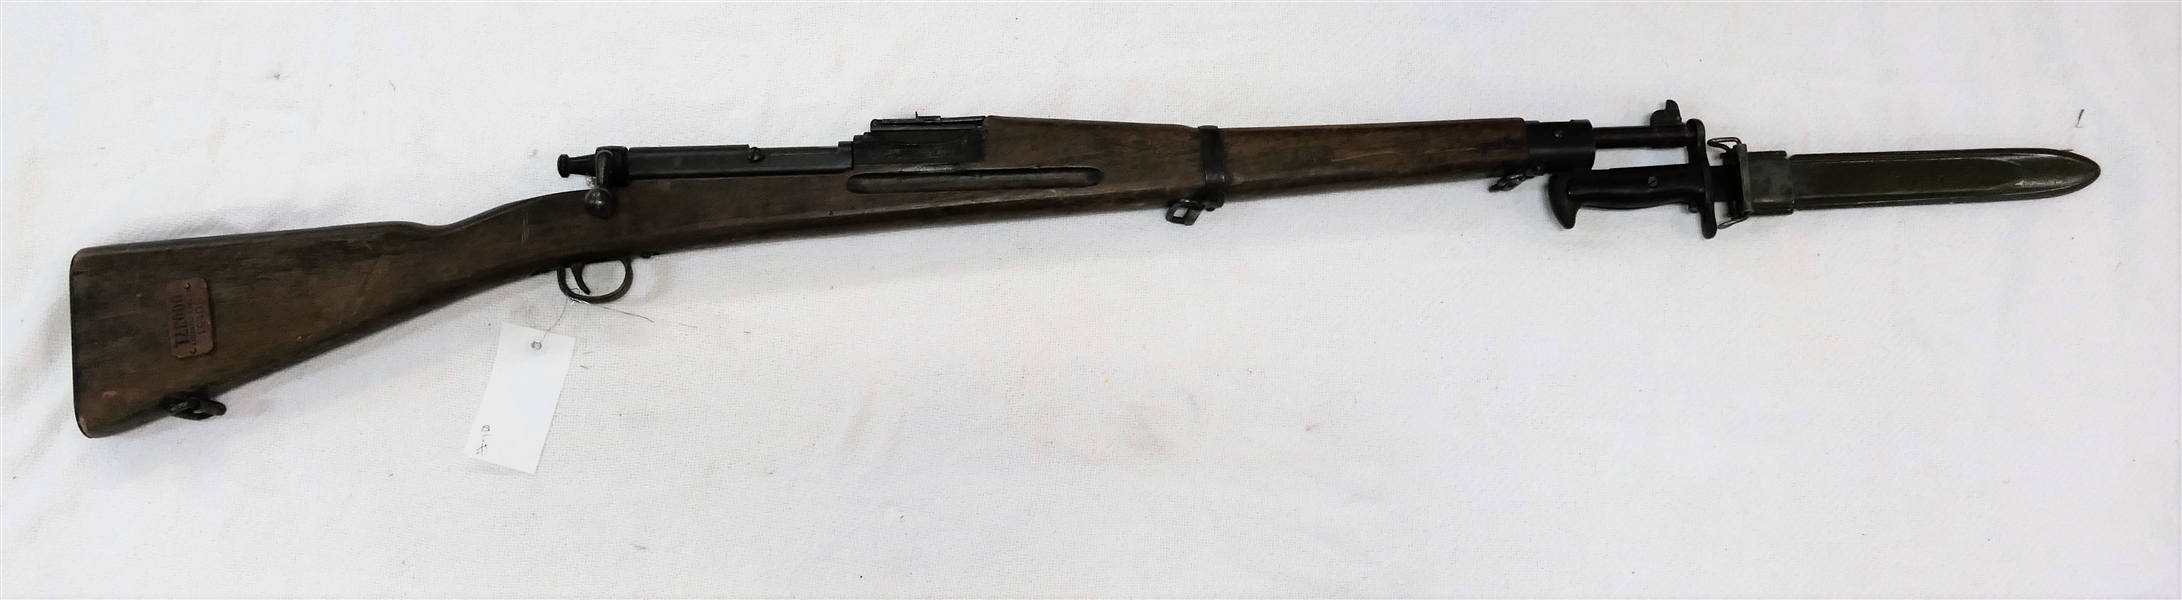 US Navy Training Rifle with 1943 Dated Bayonet - Leather Tag on Stock "US Property 060371 60151"